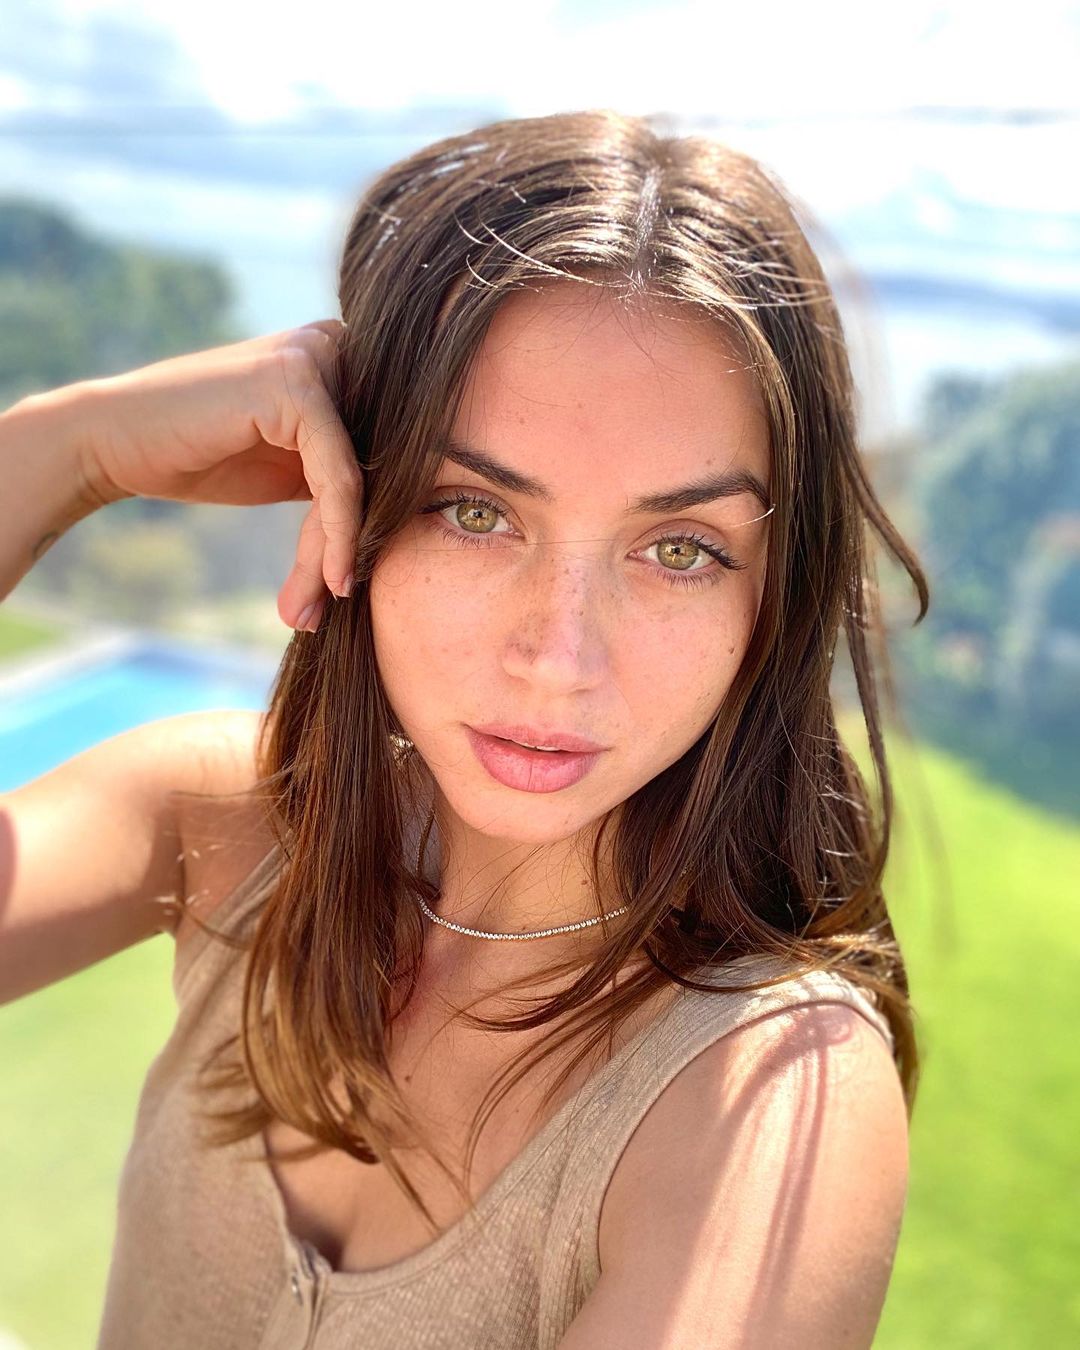 A lovely photo showing the make-up free Ana de Armas side a pool and green field and she looks amazing.